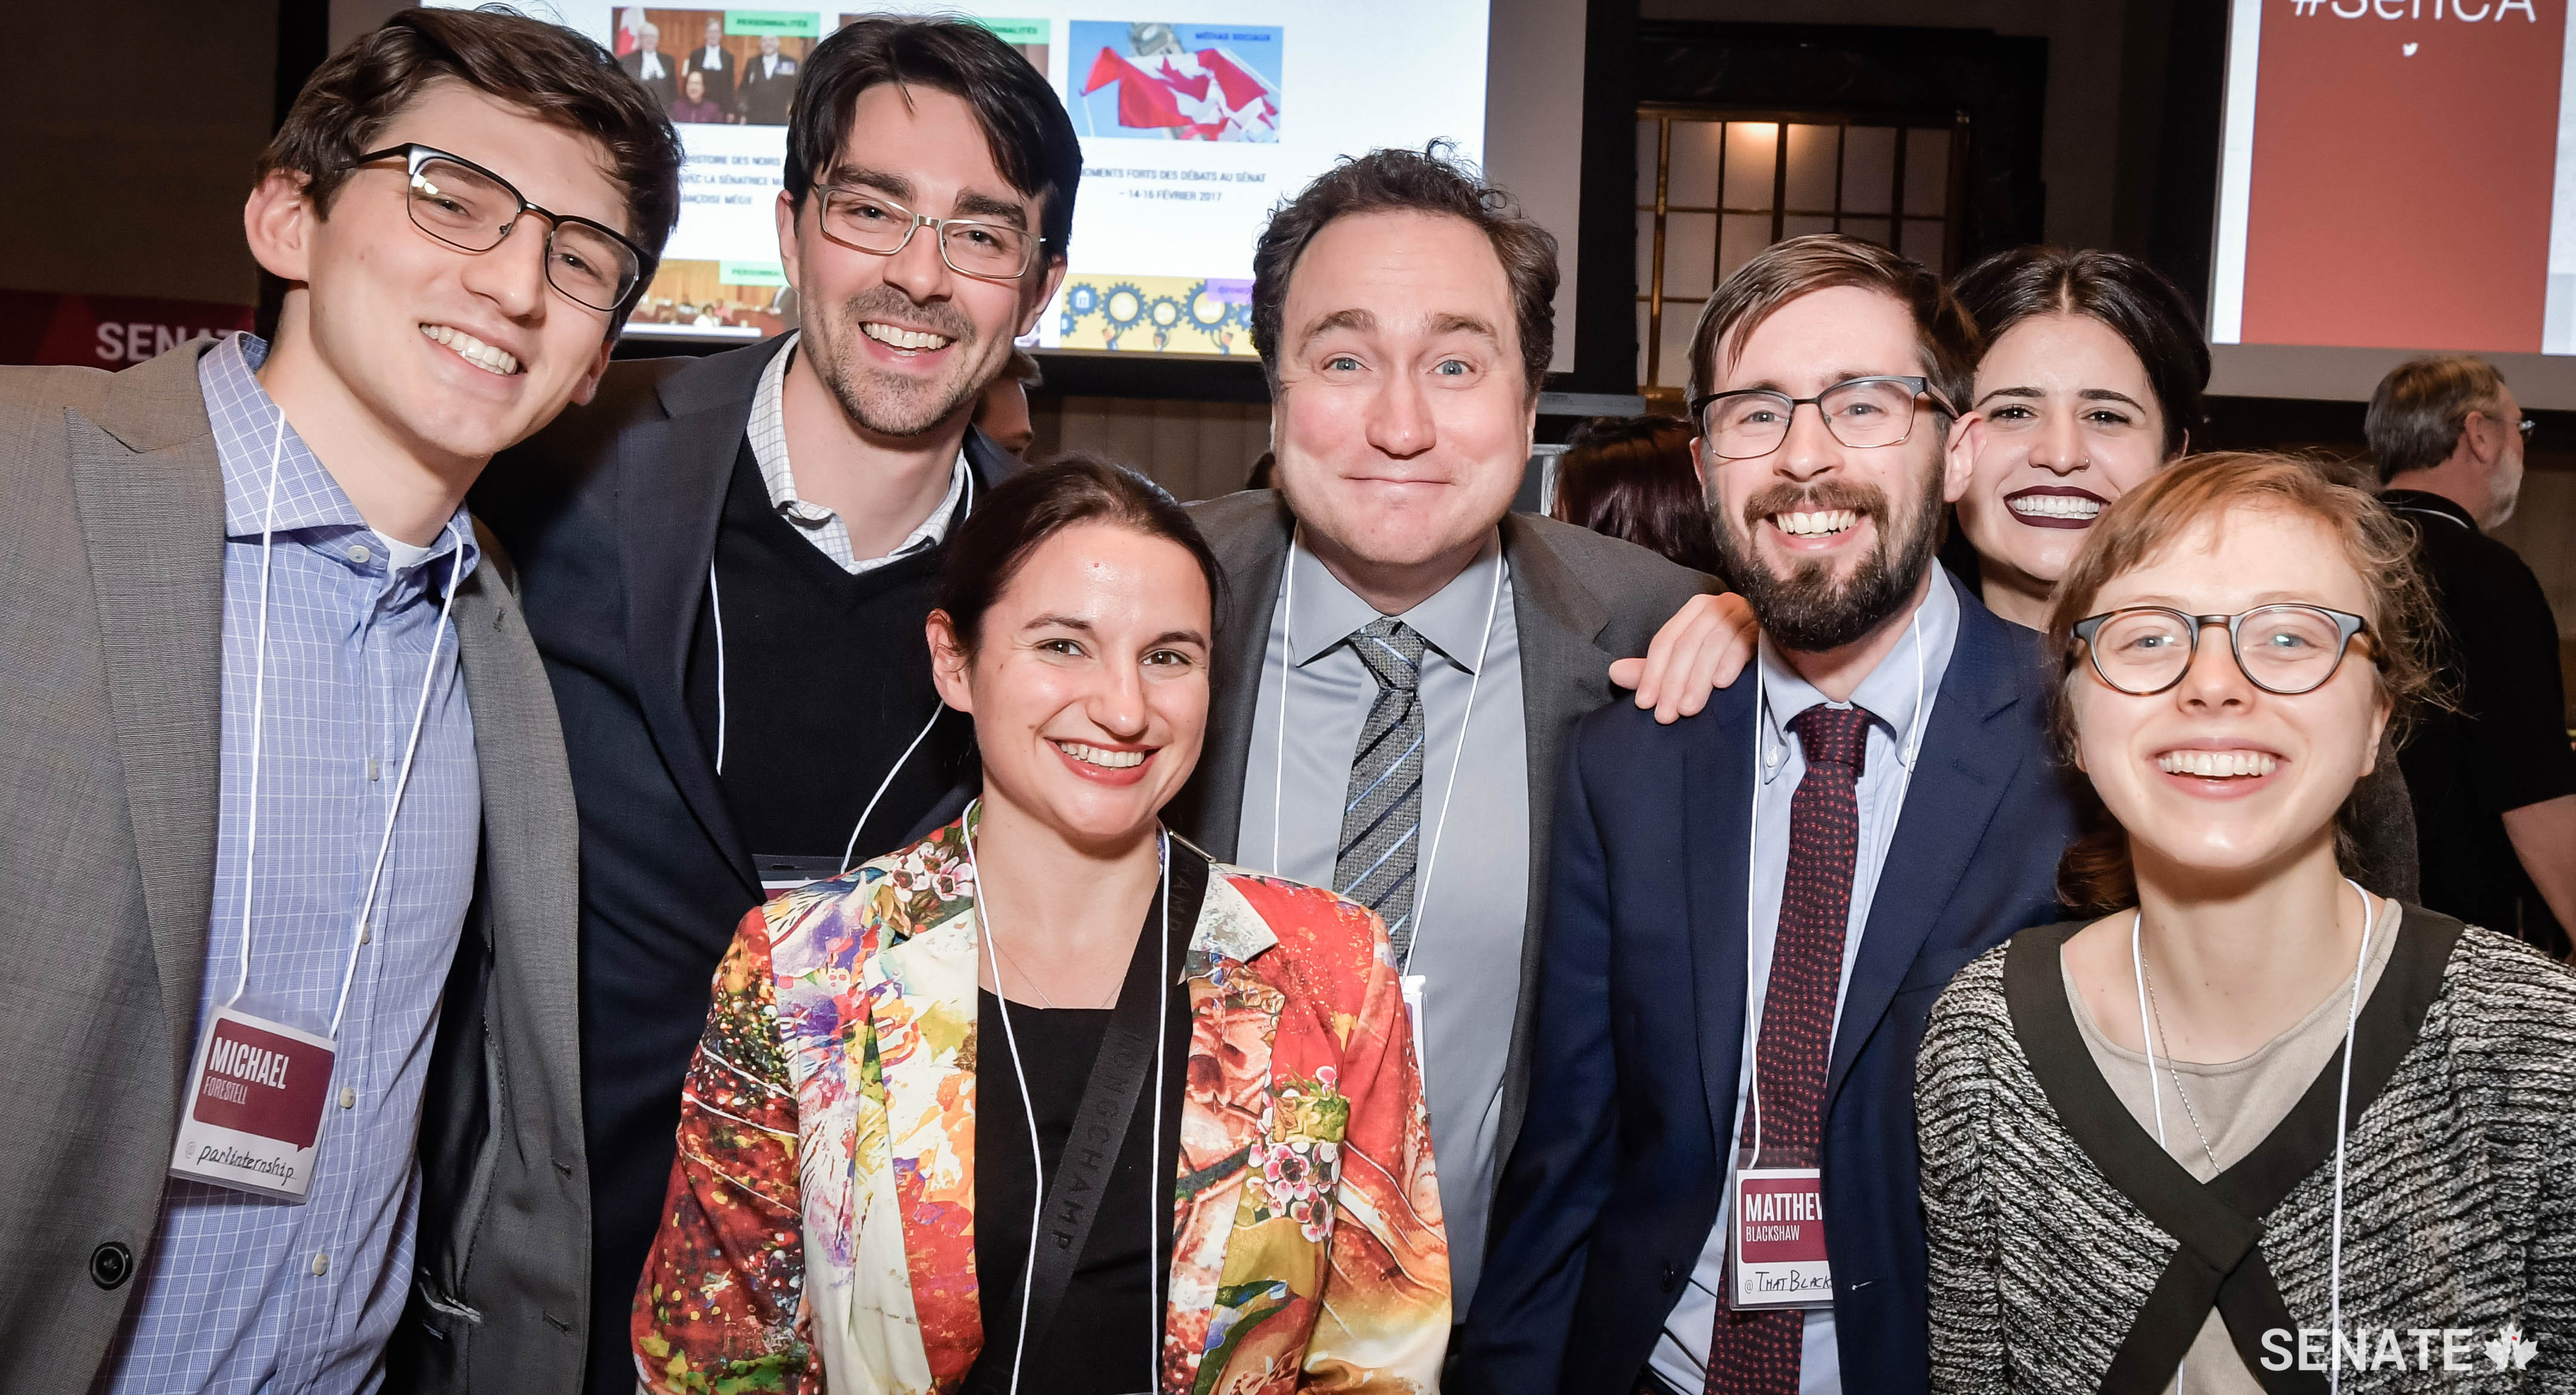 Mark Critch (centre), anchor of CBC’s This Hour Has 22 Minutes, holds court with current and former parliamentary interns Michael Forestell, Josh Regnier, Gabrielle de Billy Brown, Matthew Blackshaw, Christine Guyot, and Claire Sieffert.